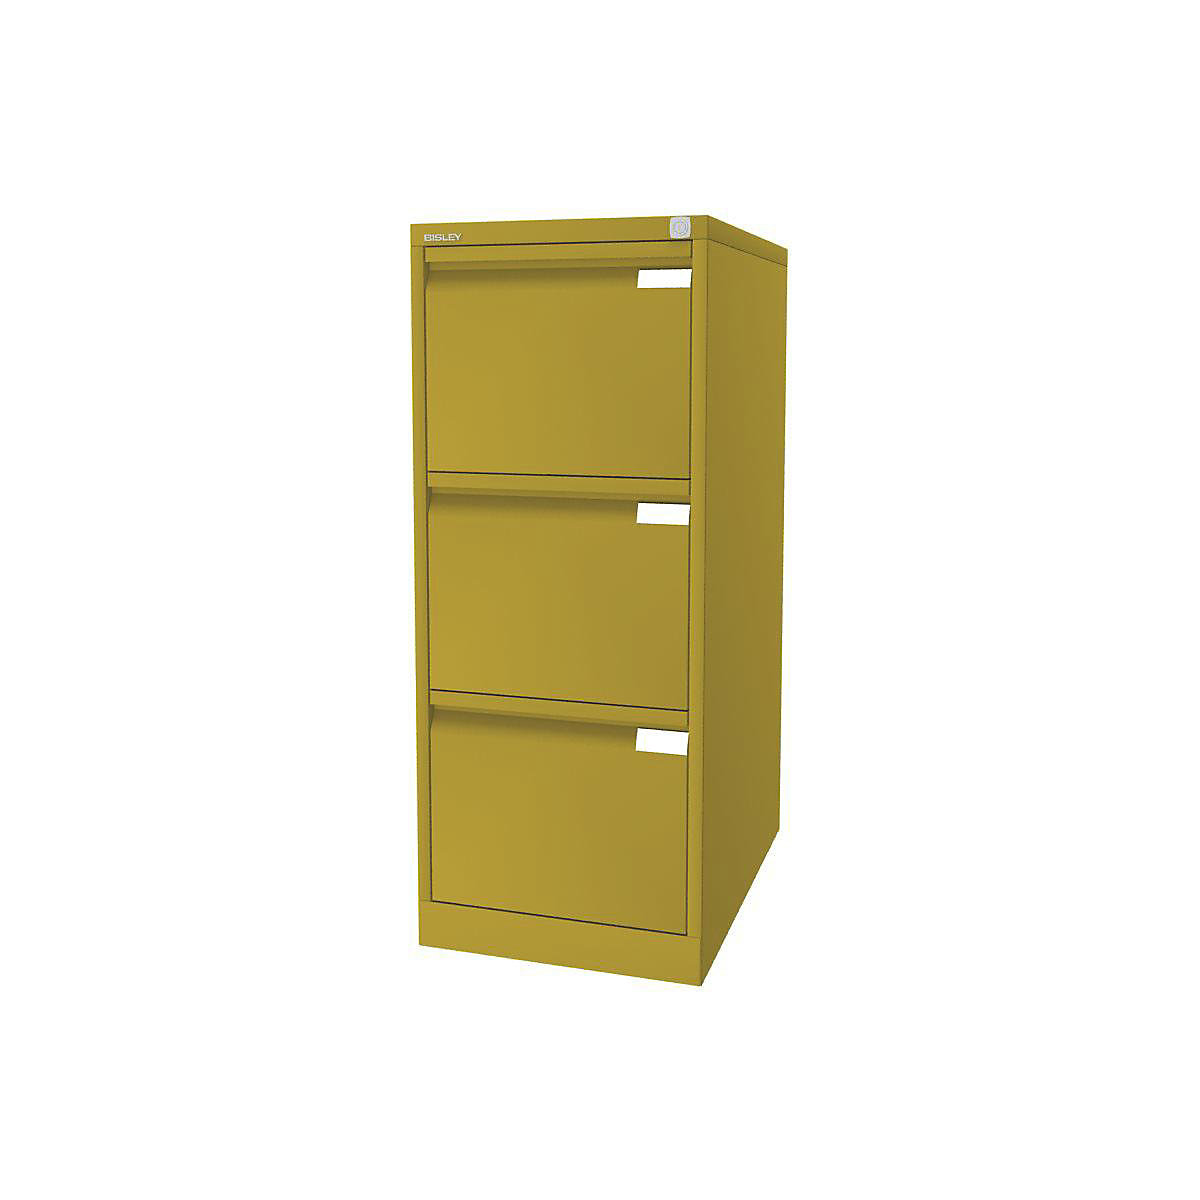 Suspension file cabinet, 1-track – BISLEY, 3 A4 drawers, yellow-16